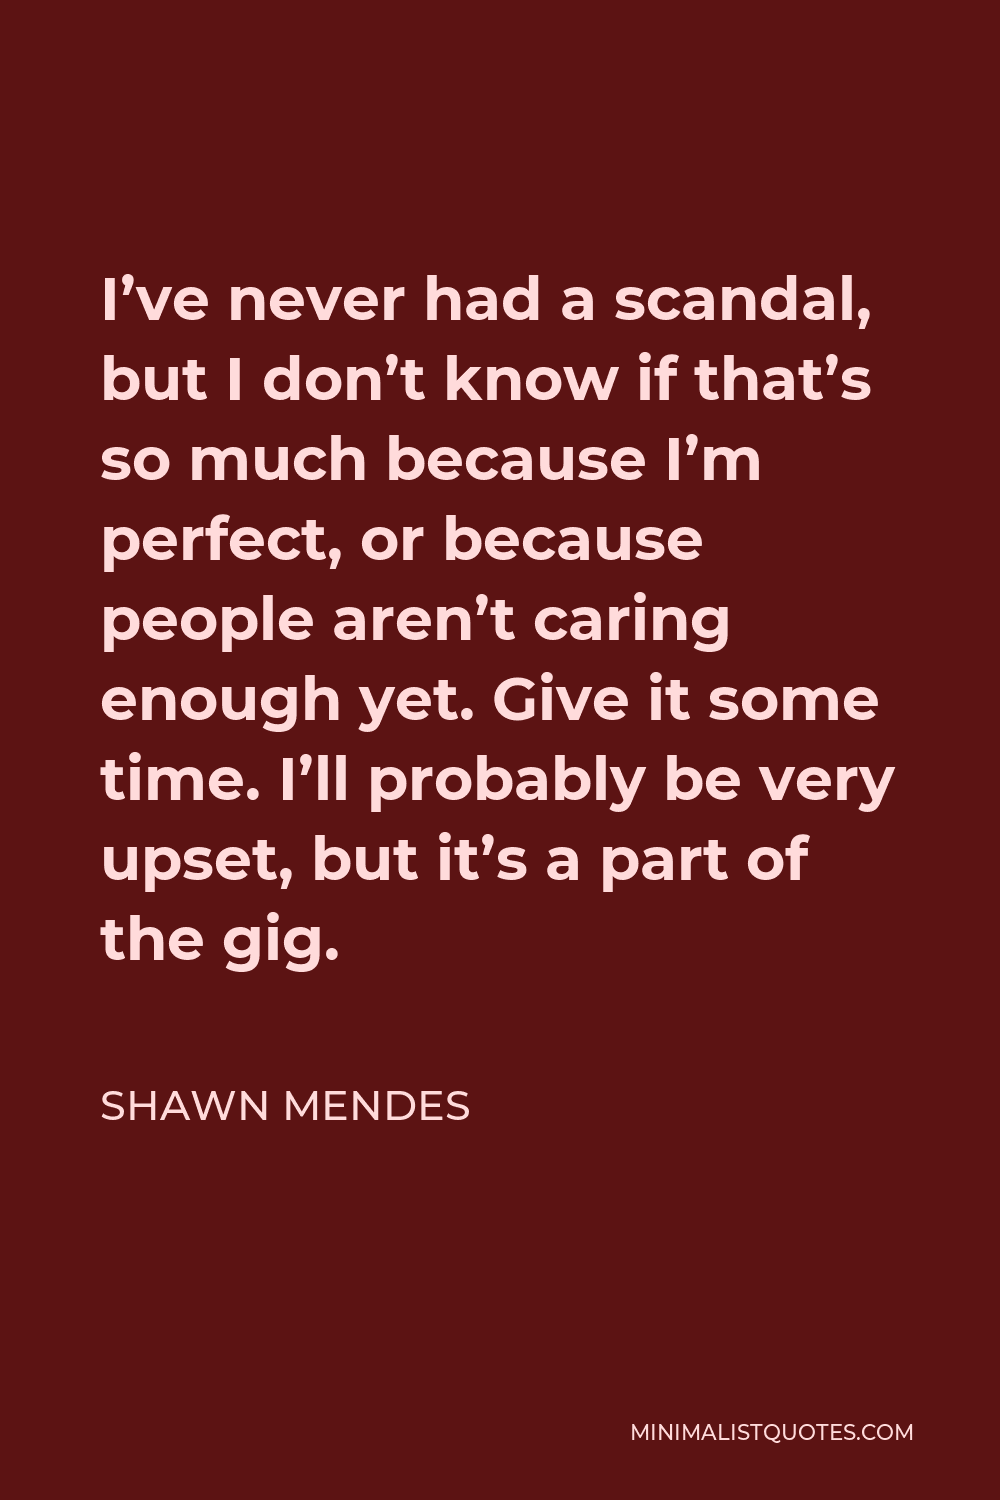 Shawn Mendes Quote - I’ve never had a scandal, but I don’t know if that’s so much because I’m perfect, or because people aren’t caring enough yet. Give it some time. I’ll probably be very upset, but it’s a part of the gig.